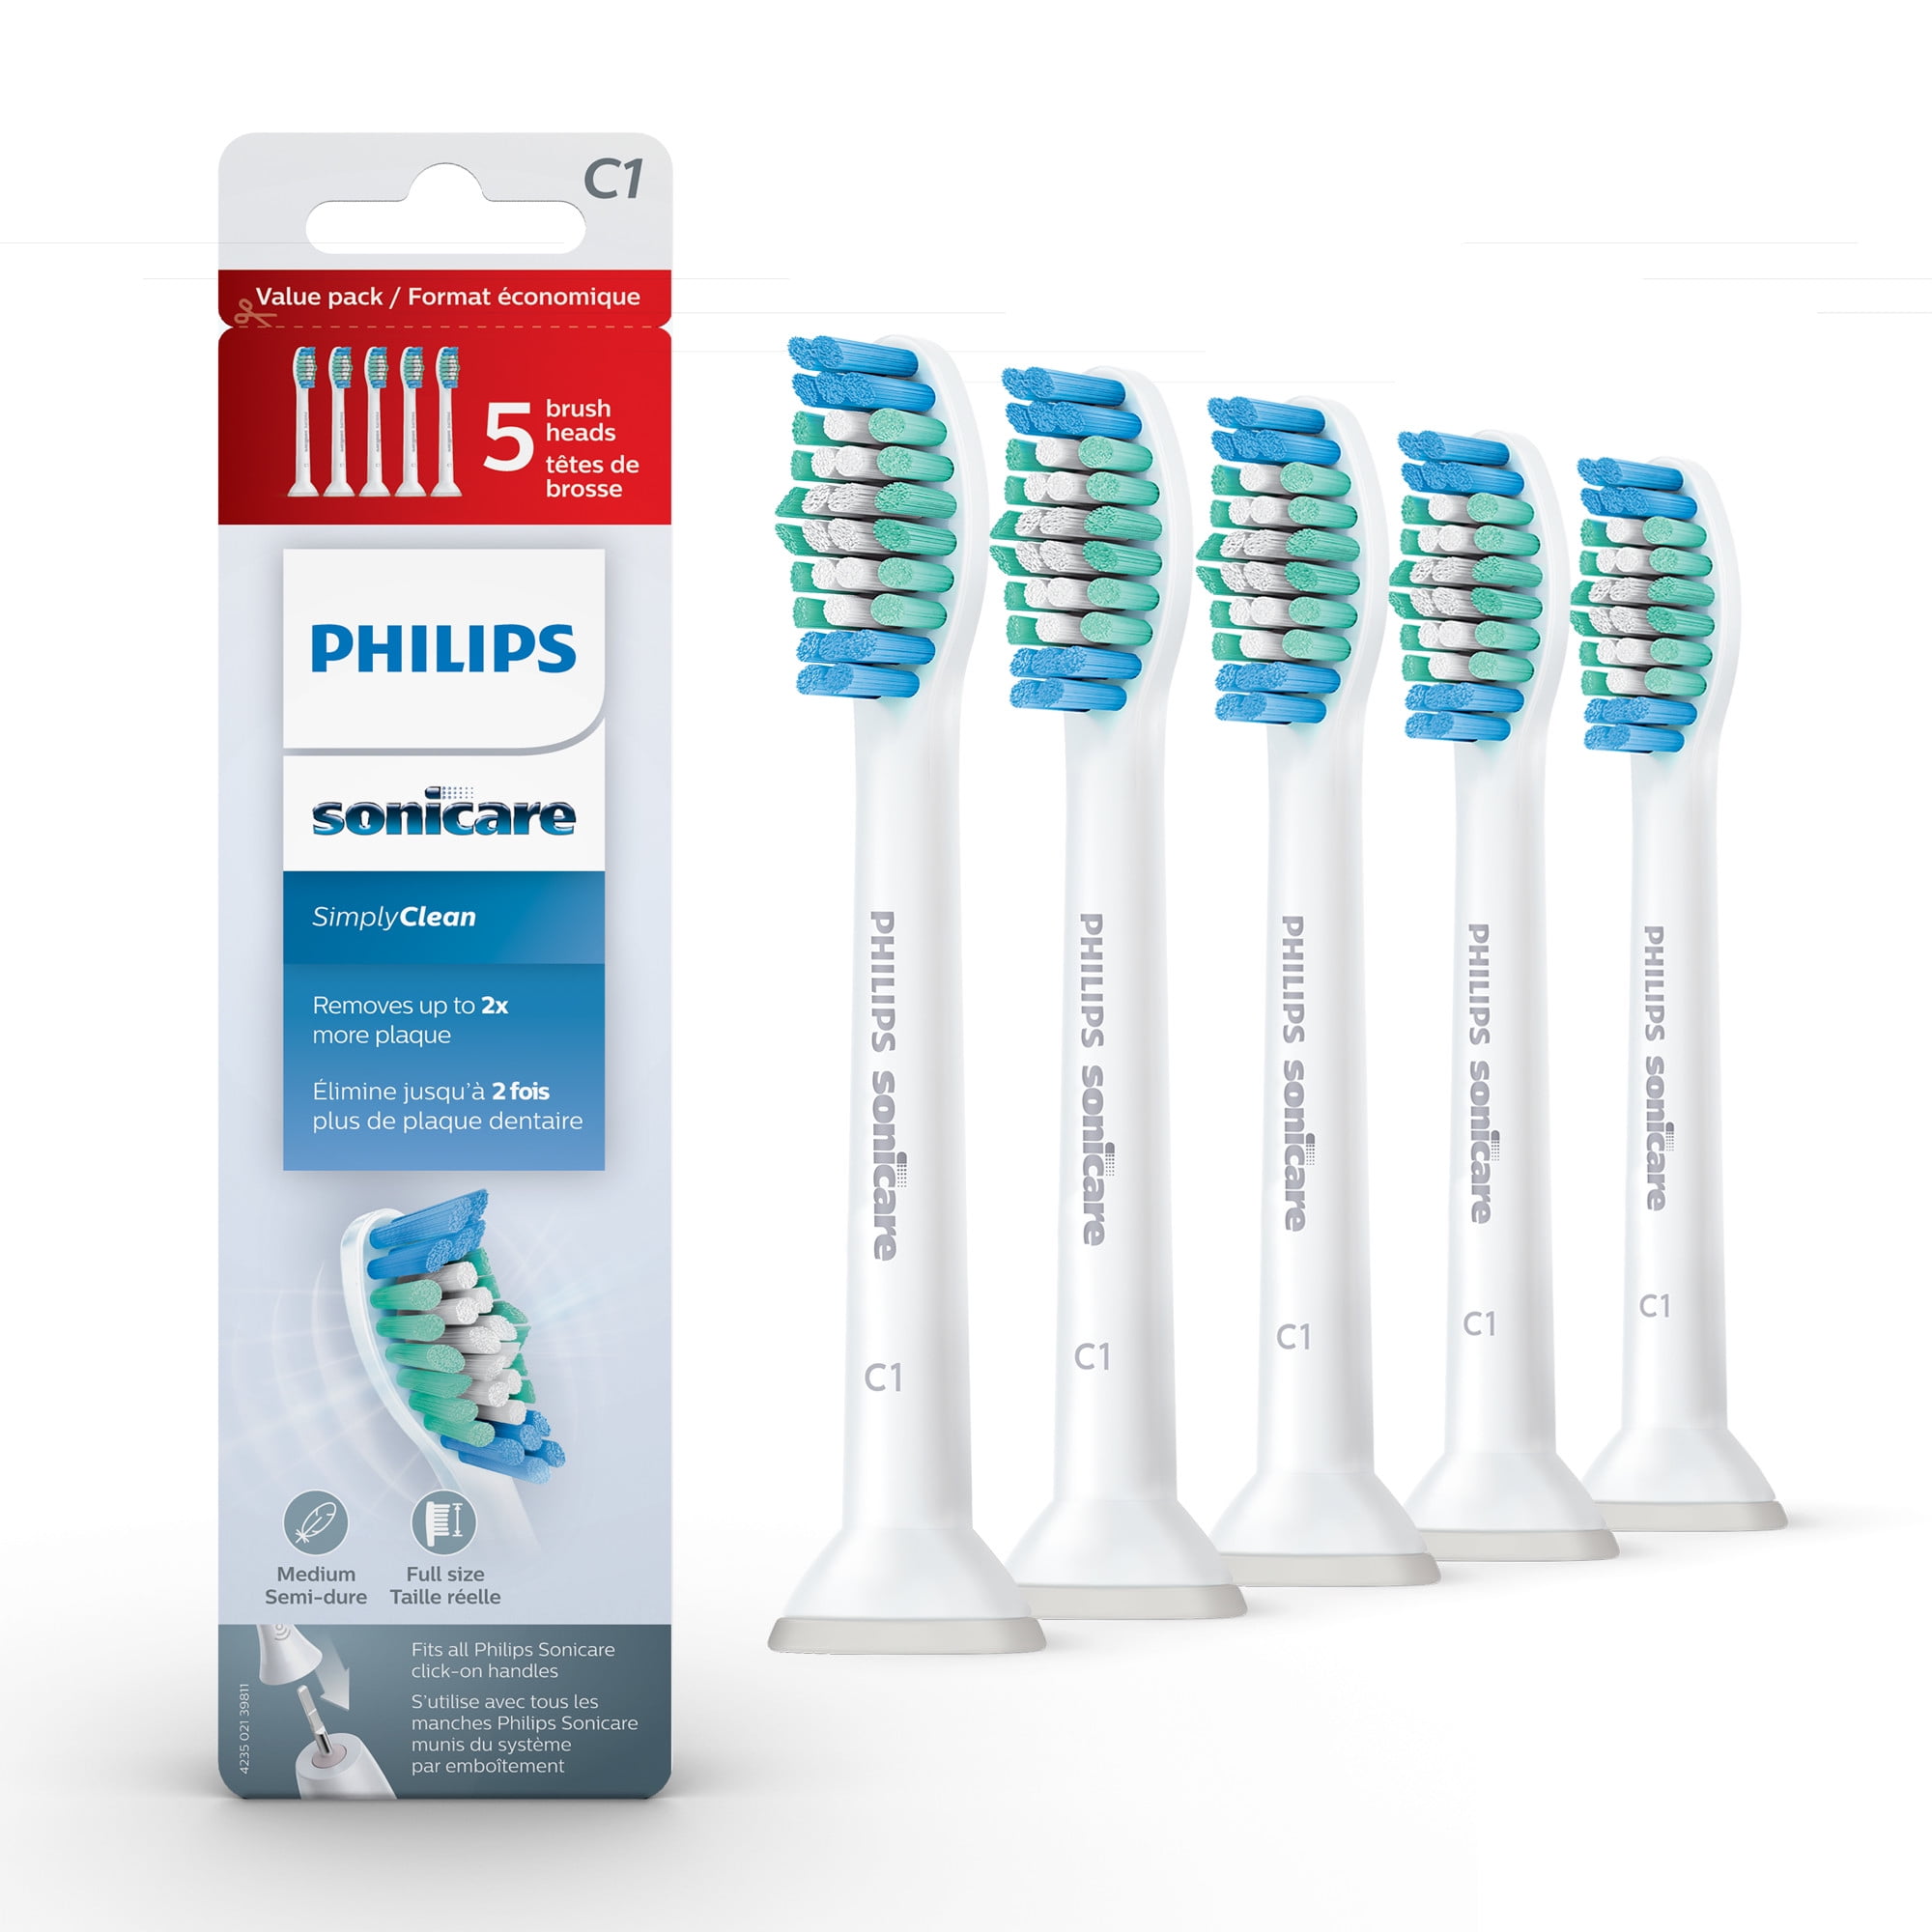 Sonicare　Philips　Toothbrush　Pack,　Simplyclean　(C1)　Heads,　Replacement　HX6015/03